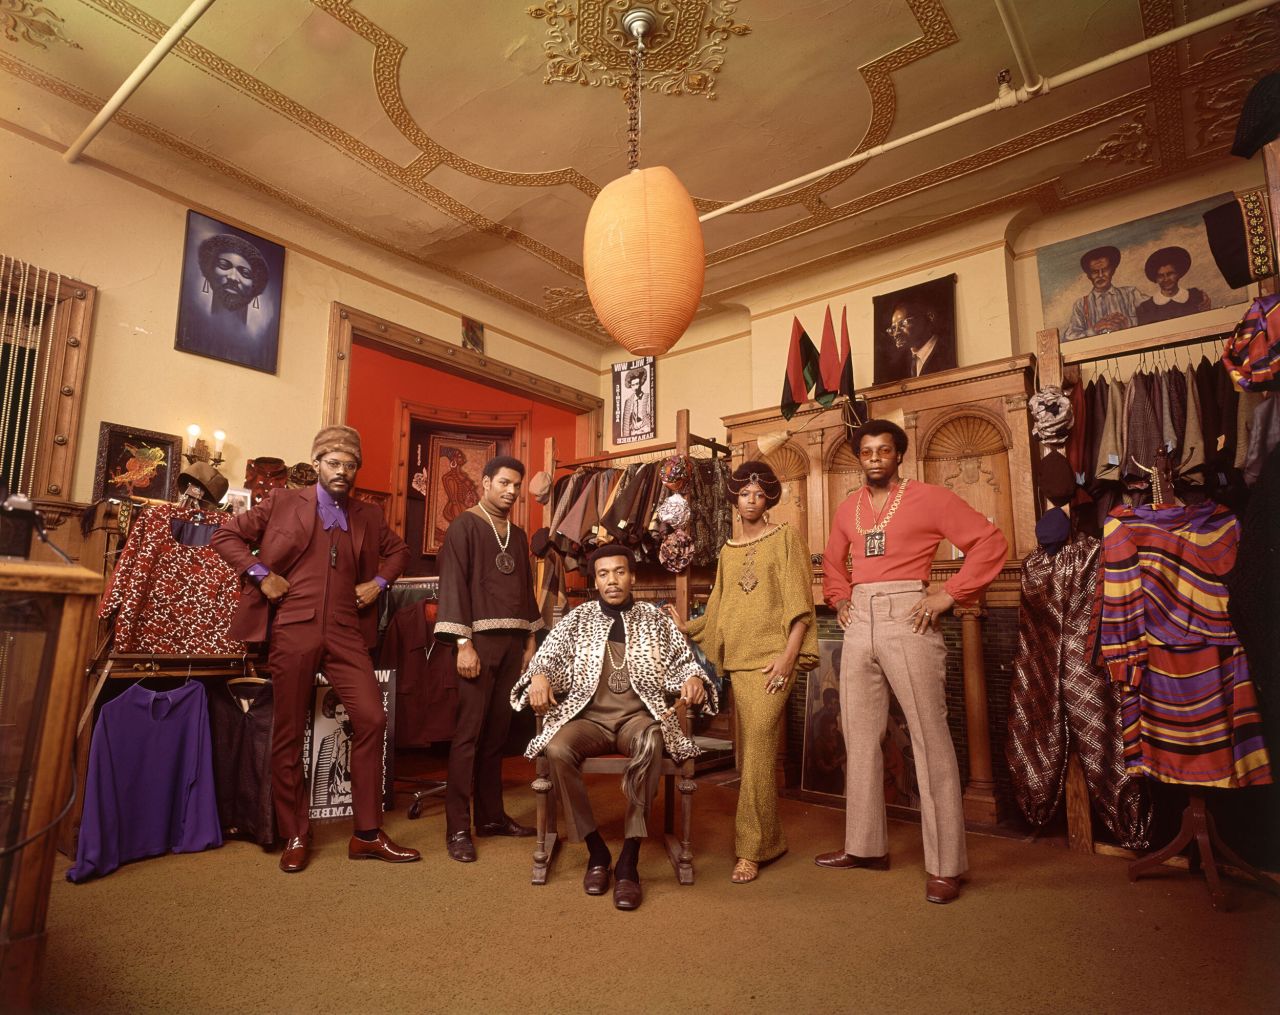 The New Breed fashion boutique, which opened in Harlem in 1967, sold Afrocentric designs and served as a popular community hub. 